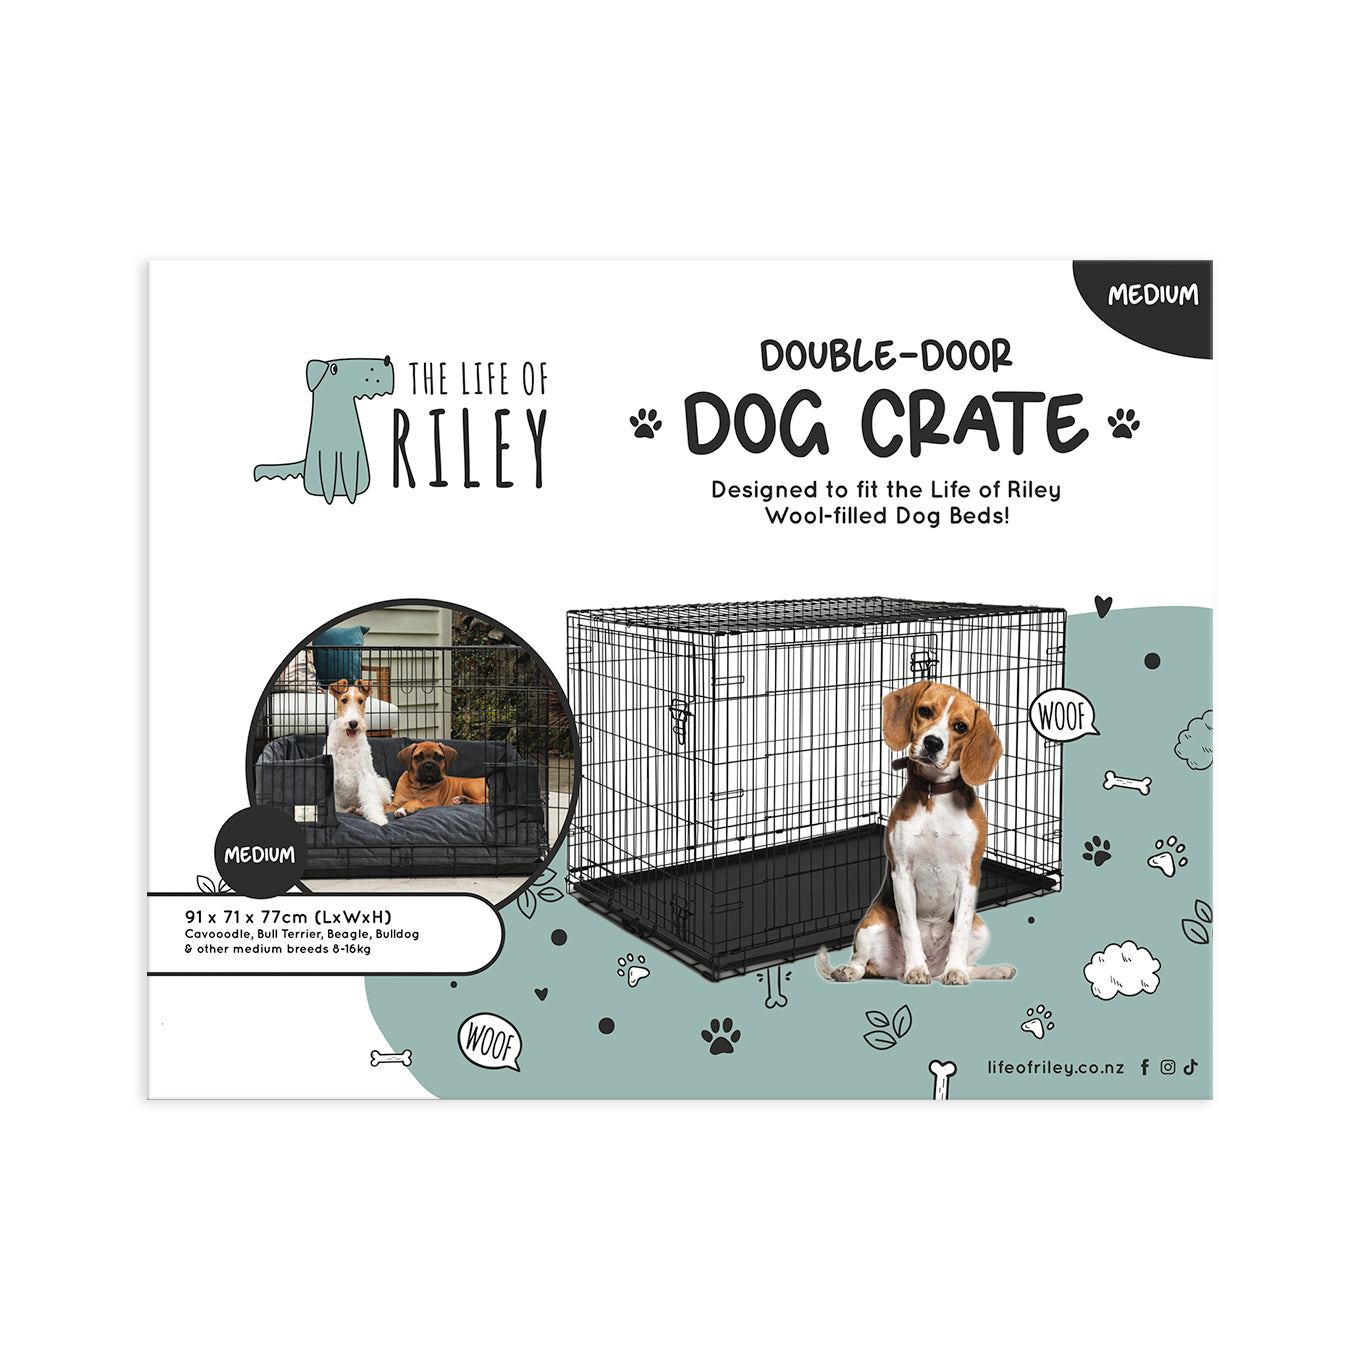 Premium Dog Crate The Life of Riley  The Life of Riley